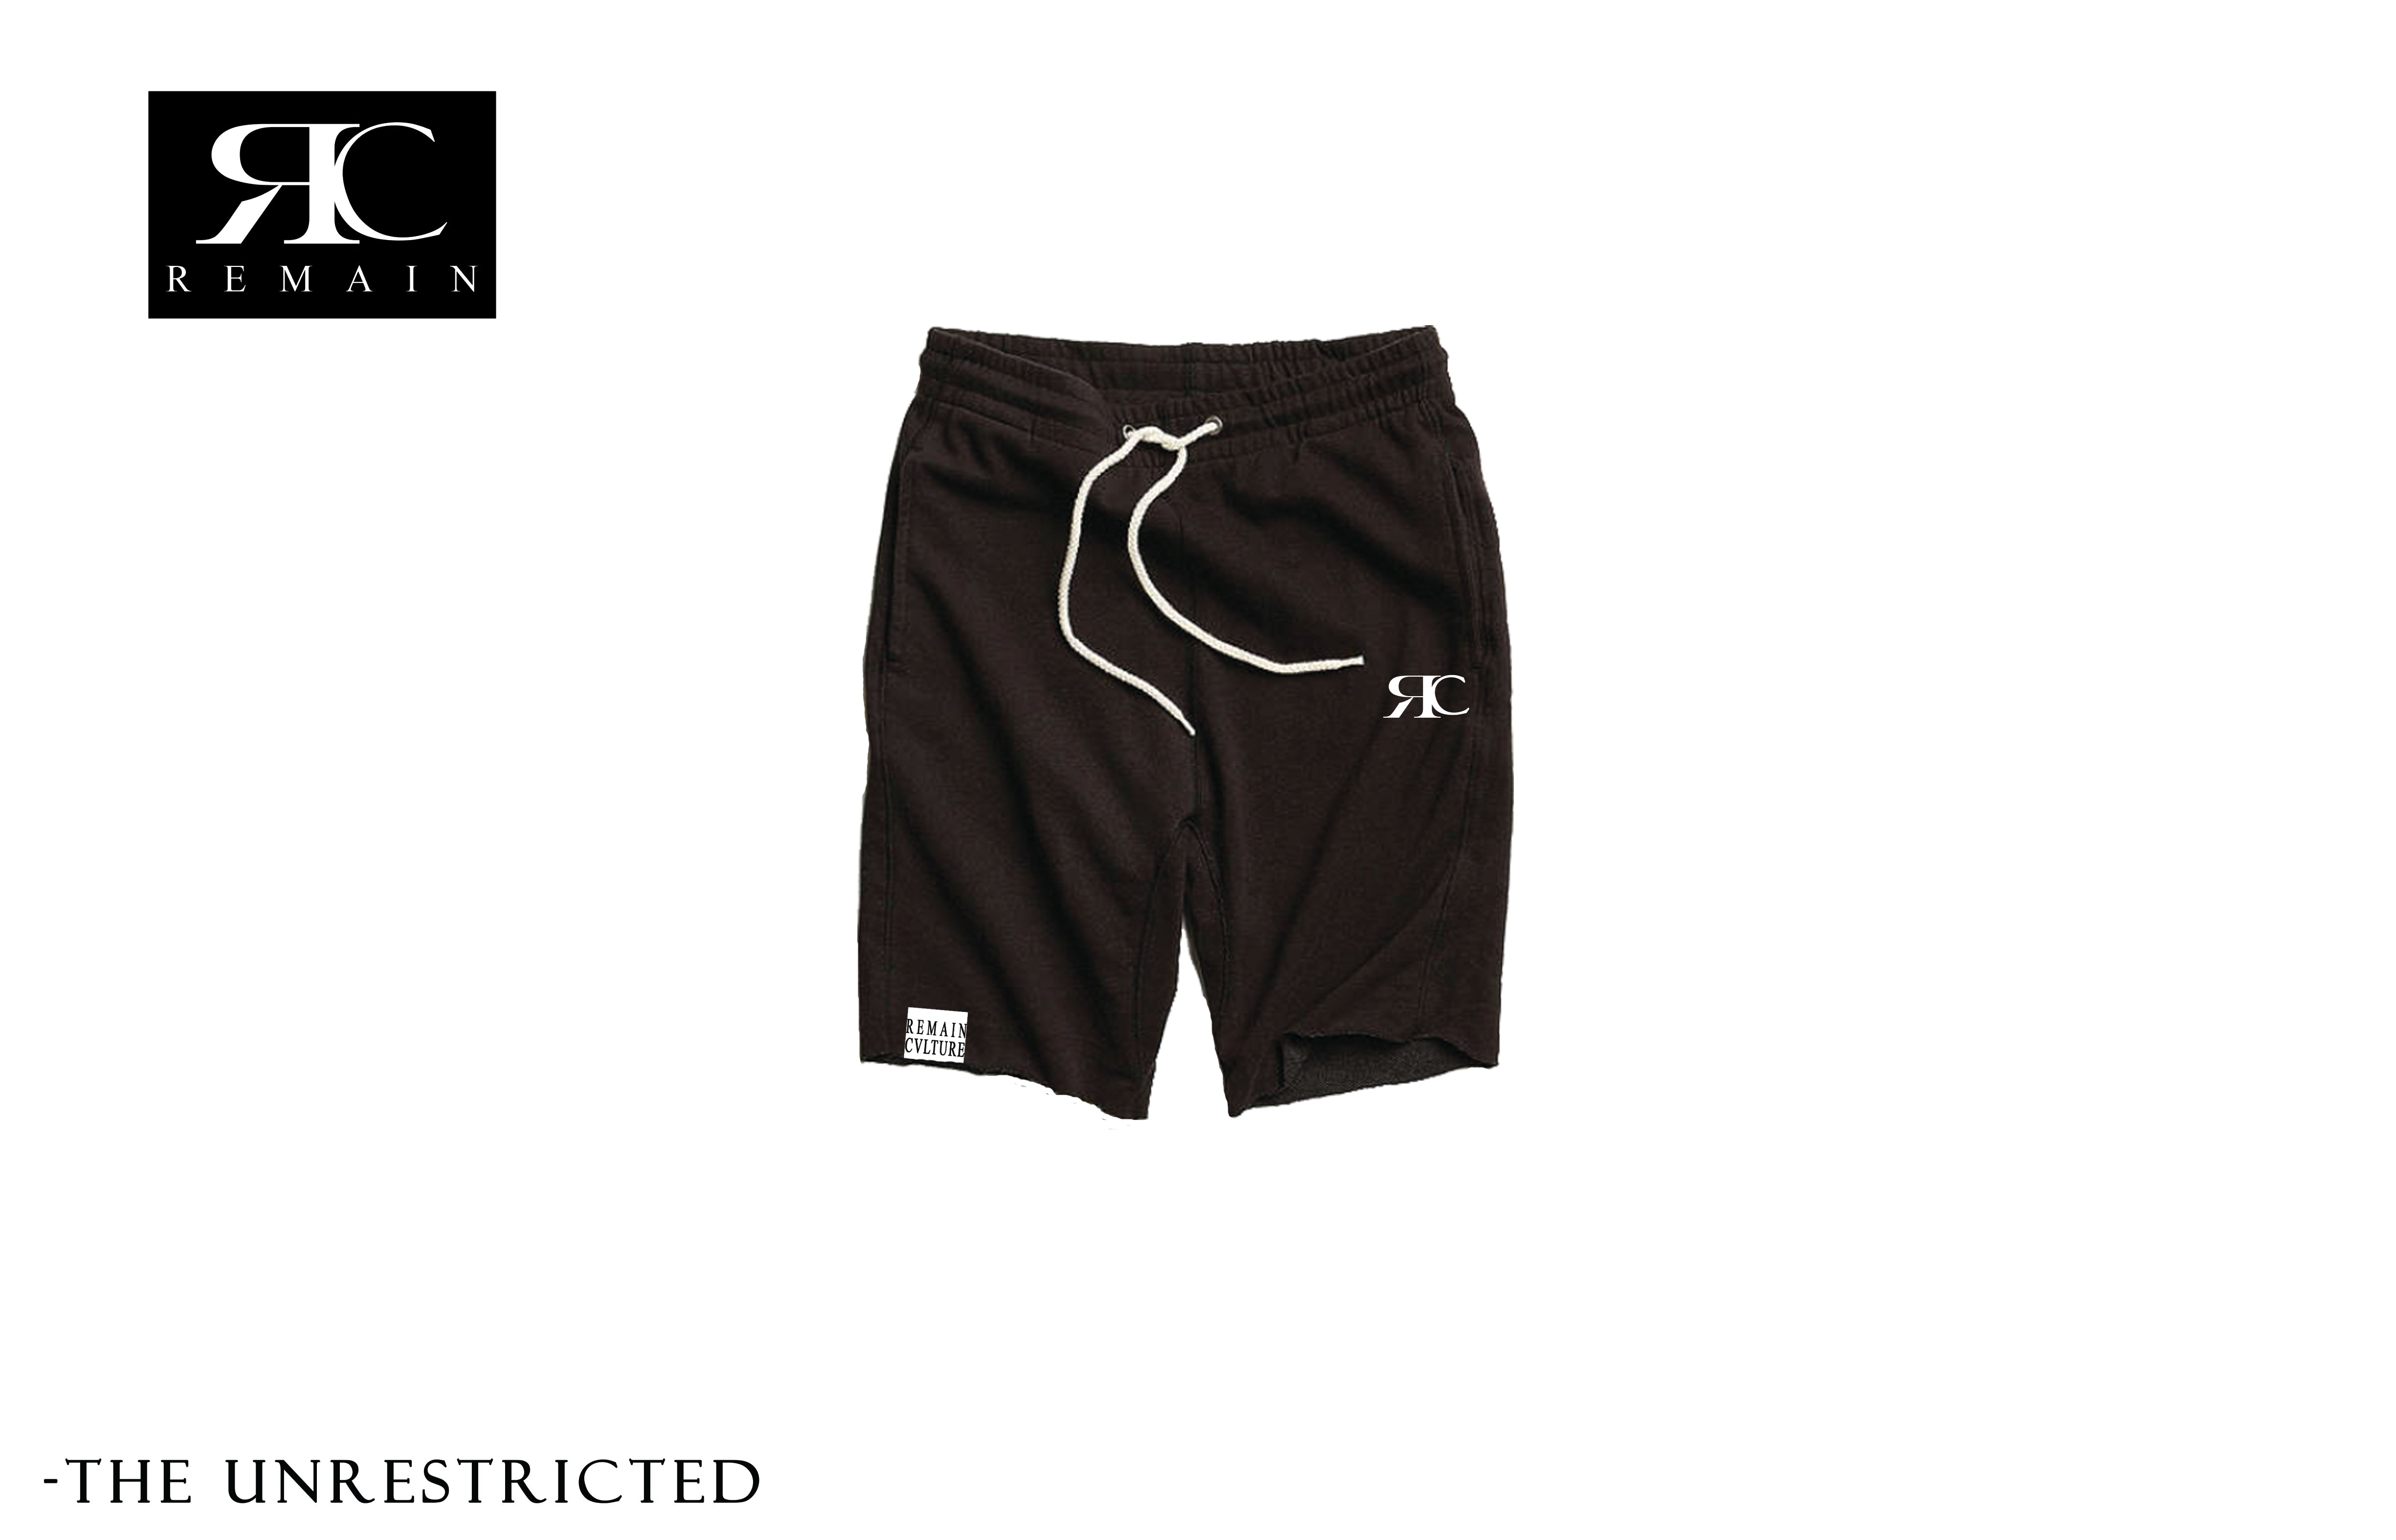 The Unrestricted Shorts